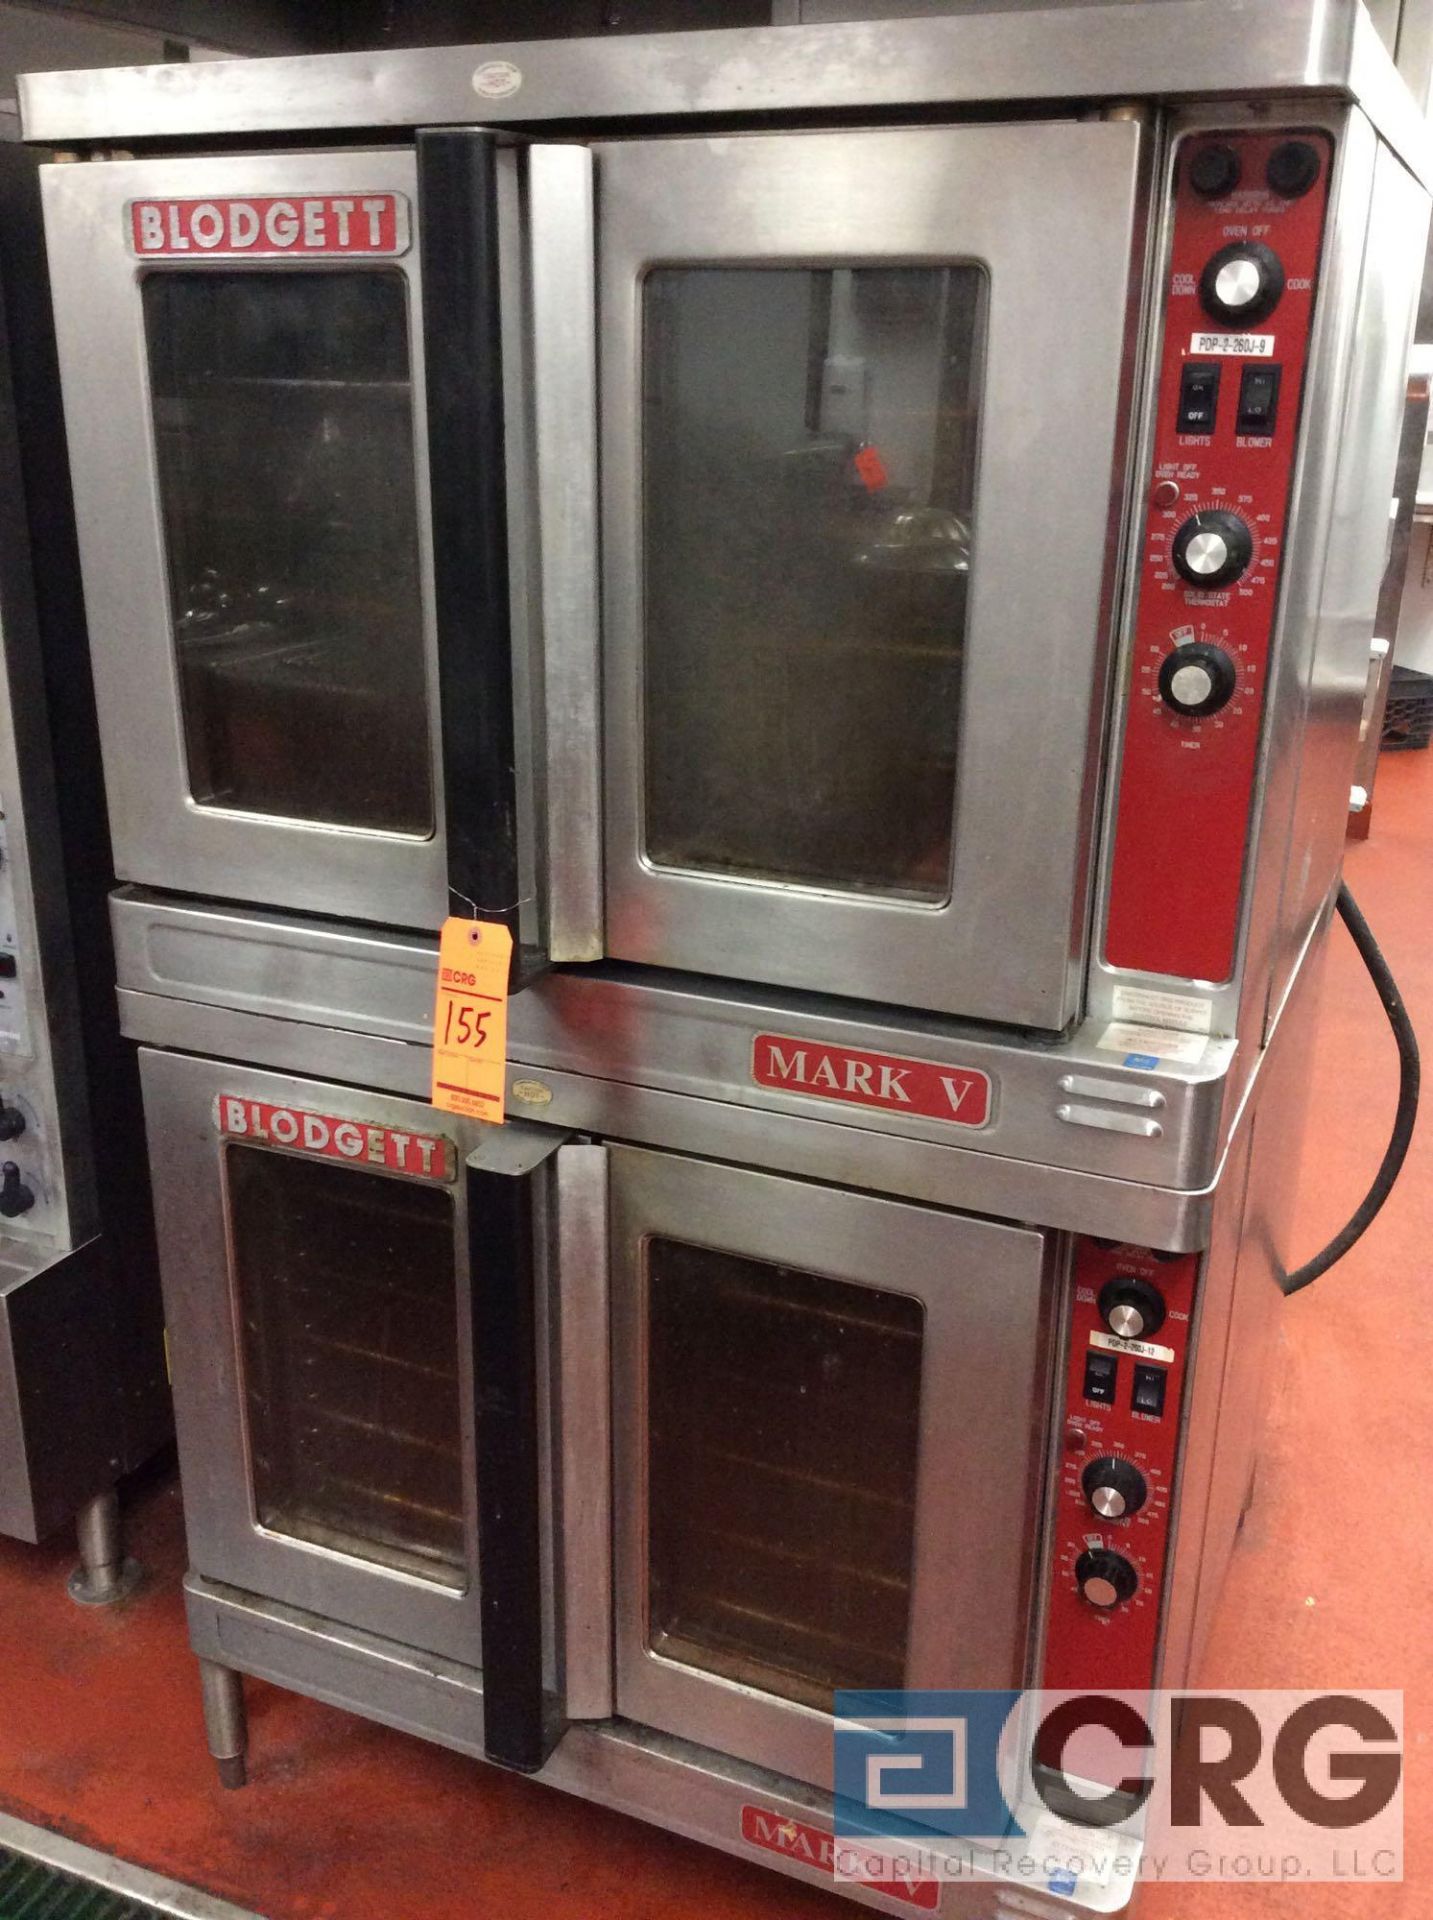 Blodgett over/under, 2 compartment electric convection oven, 208V, 3PH, 22 kw, m/n MARKV (kitchen)